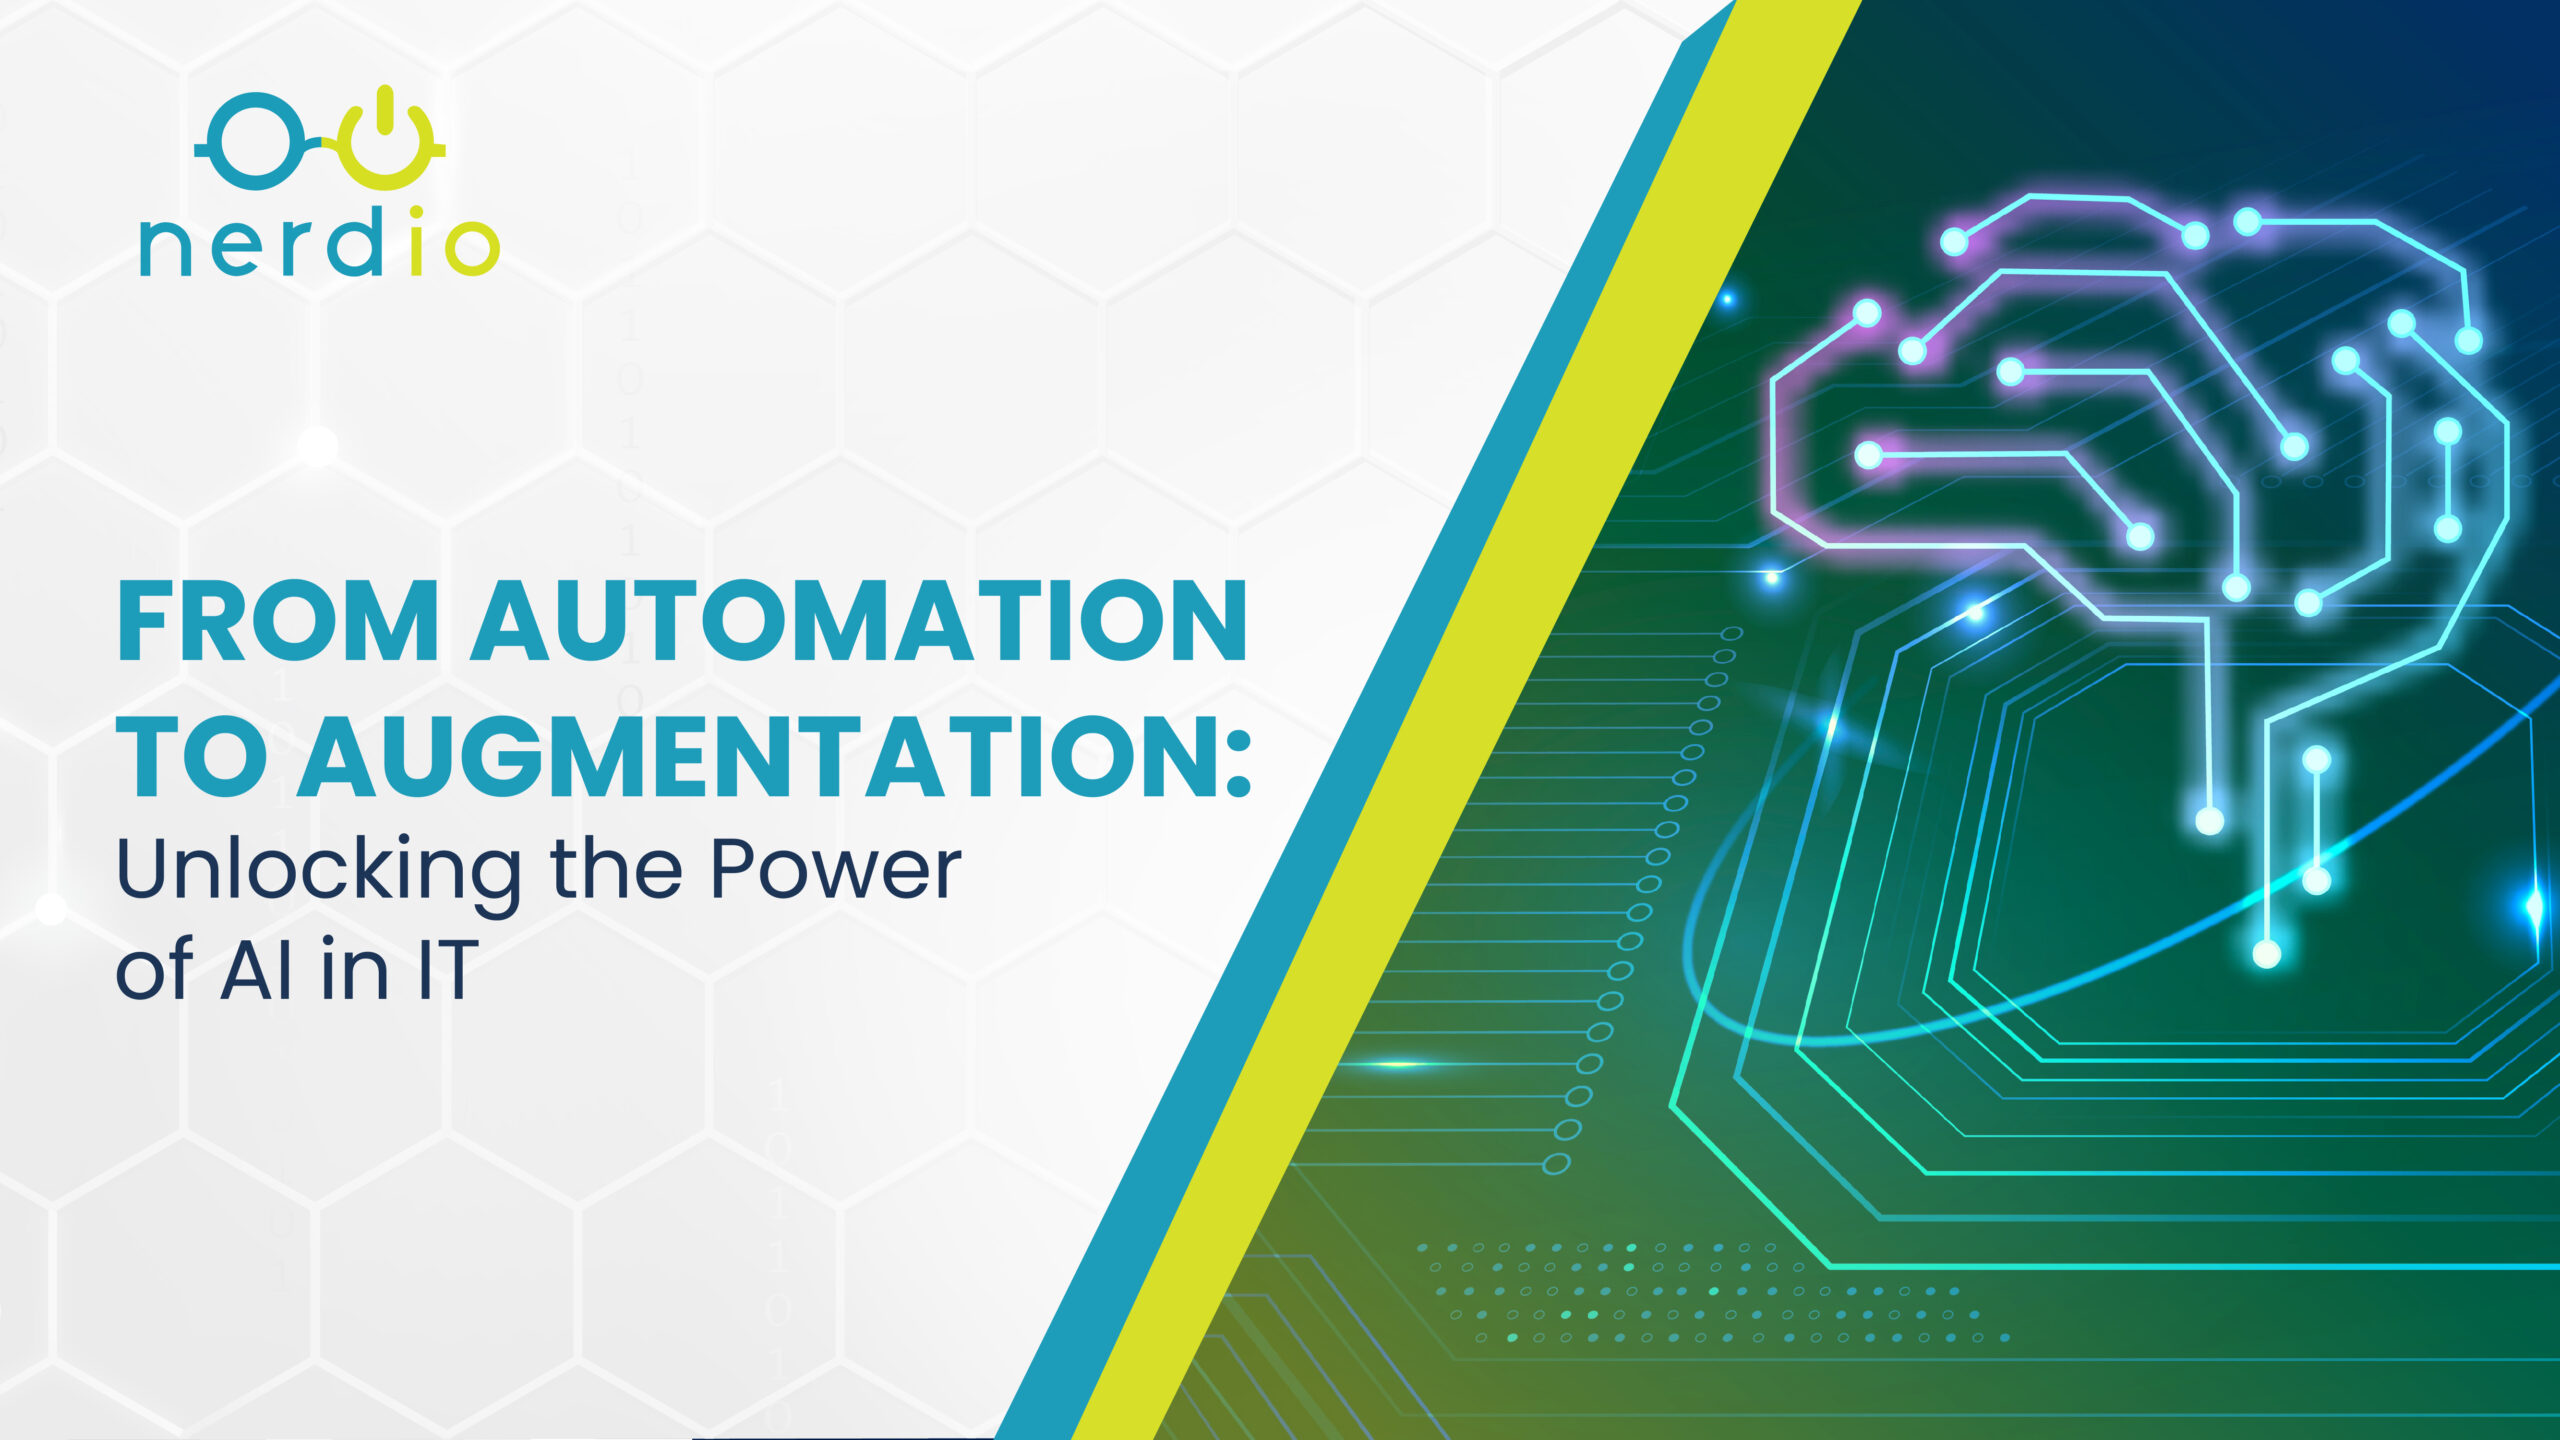 From Automation to Augmentation Unlocking the Power of AI in IT